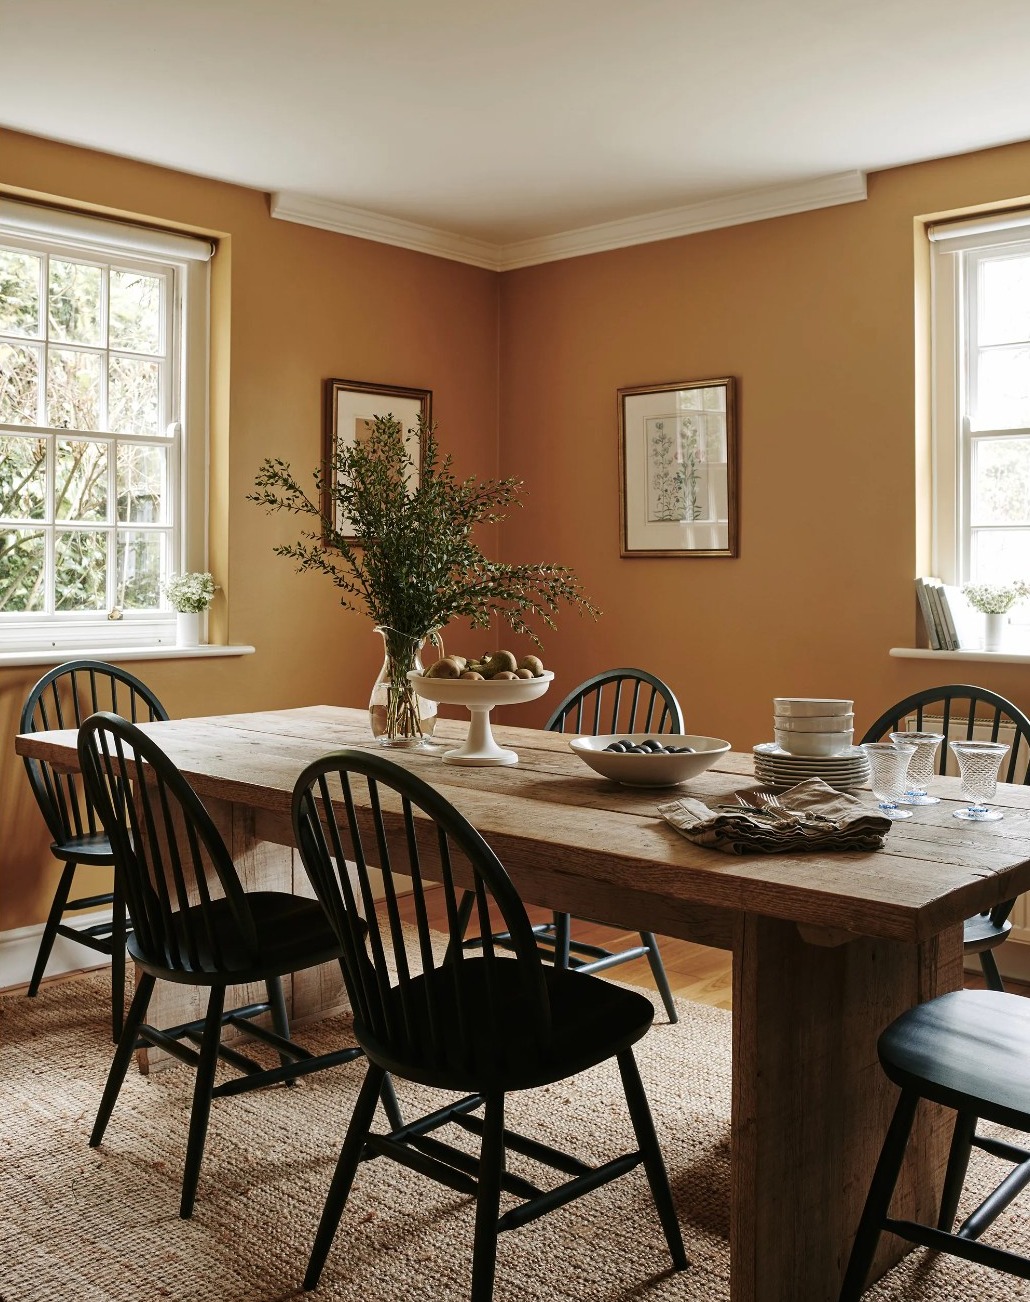 Dining room painted in Farrow and Ball India Yellow